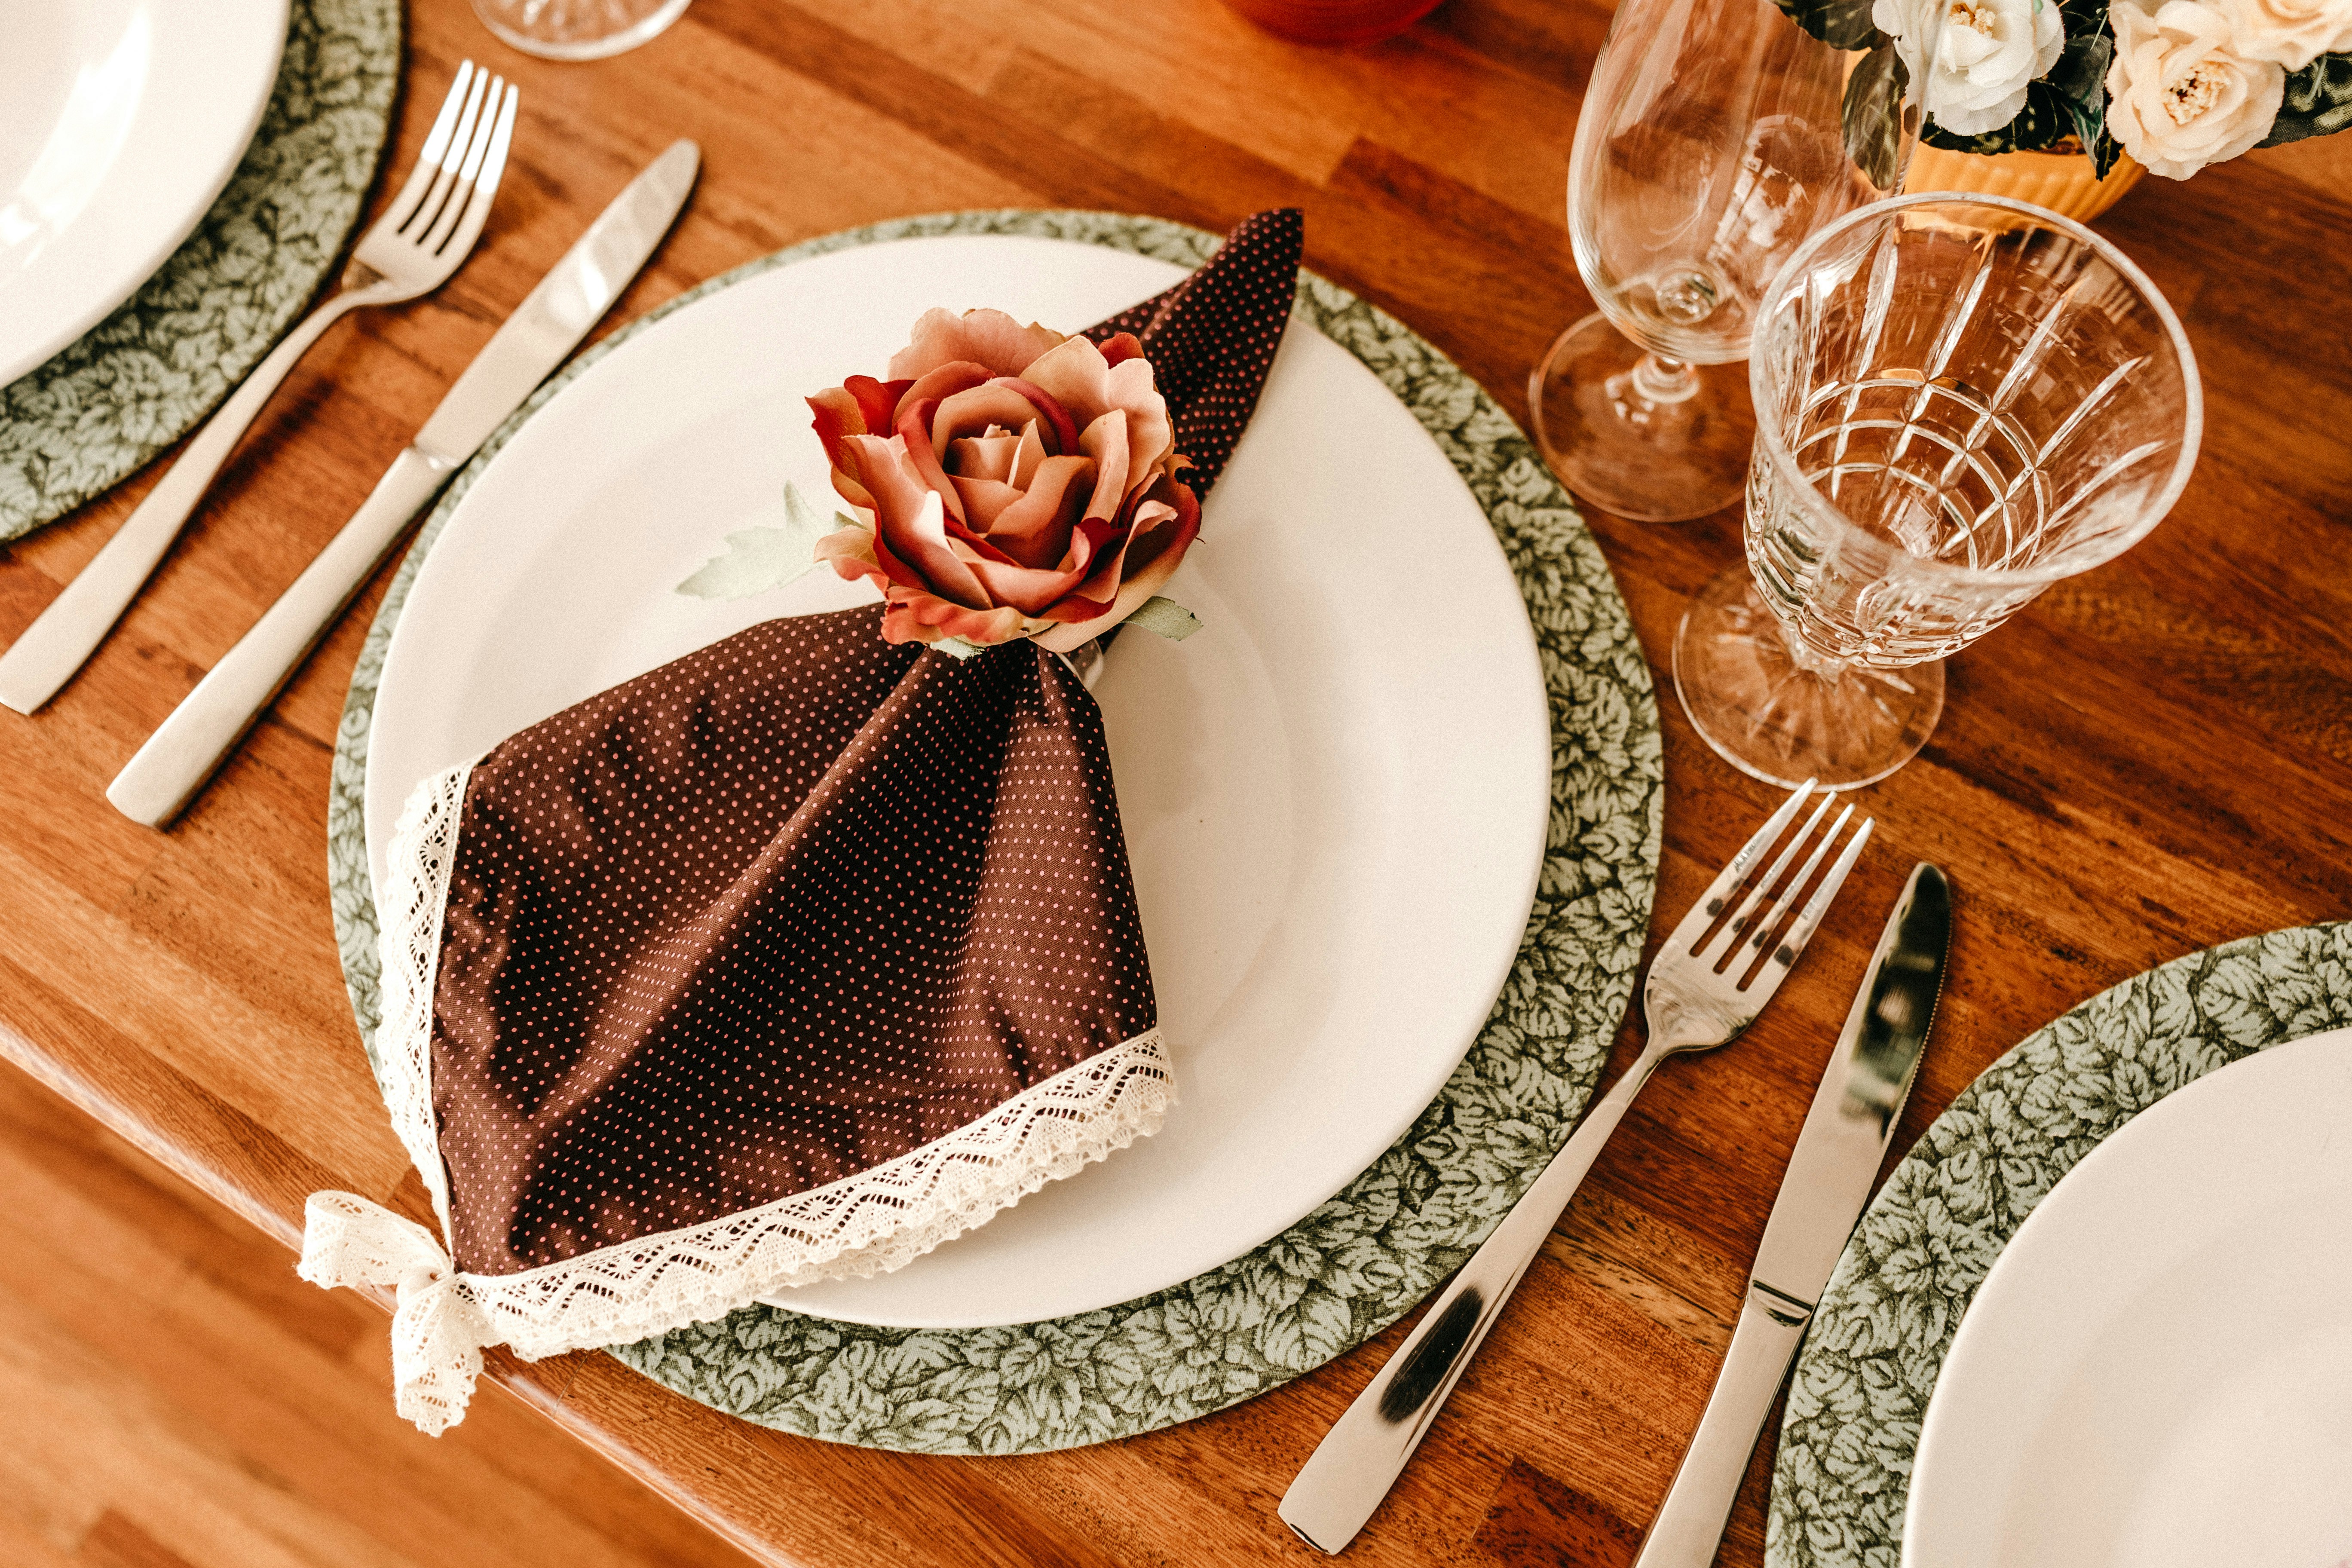 A napkin on a plate and other cutlery | Source: Unsplash